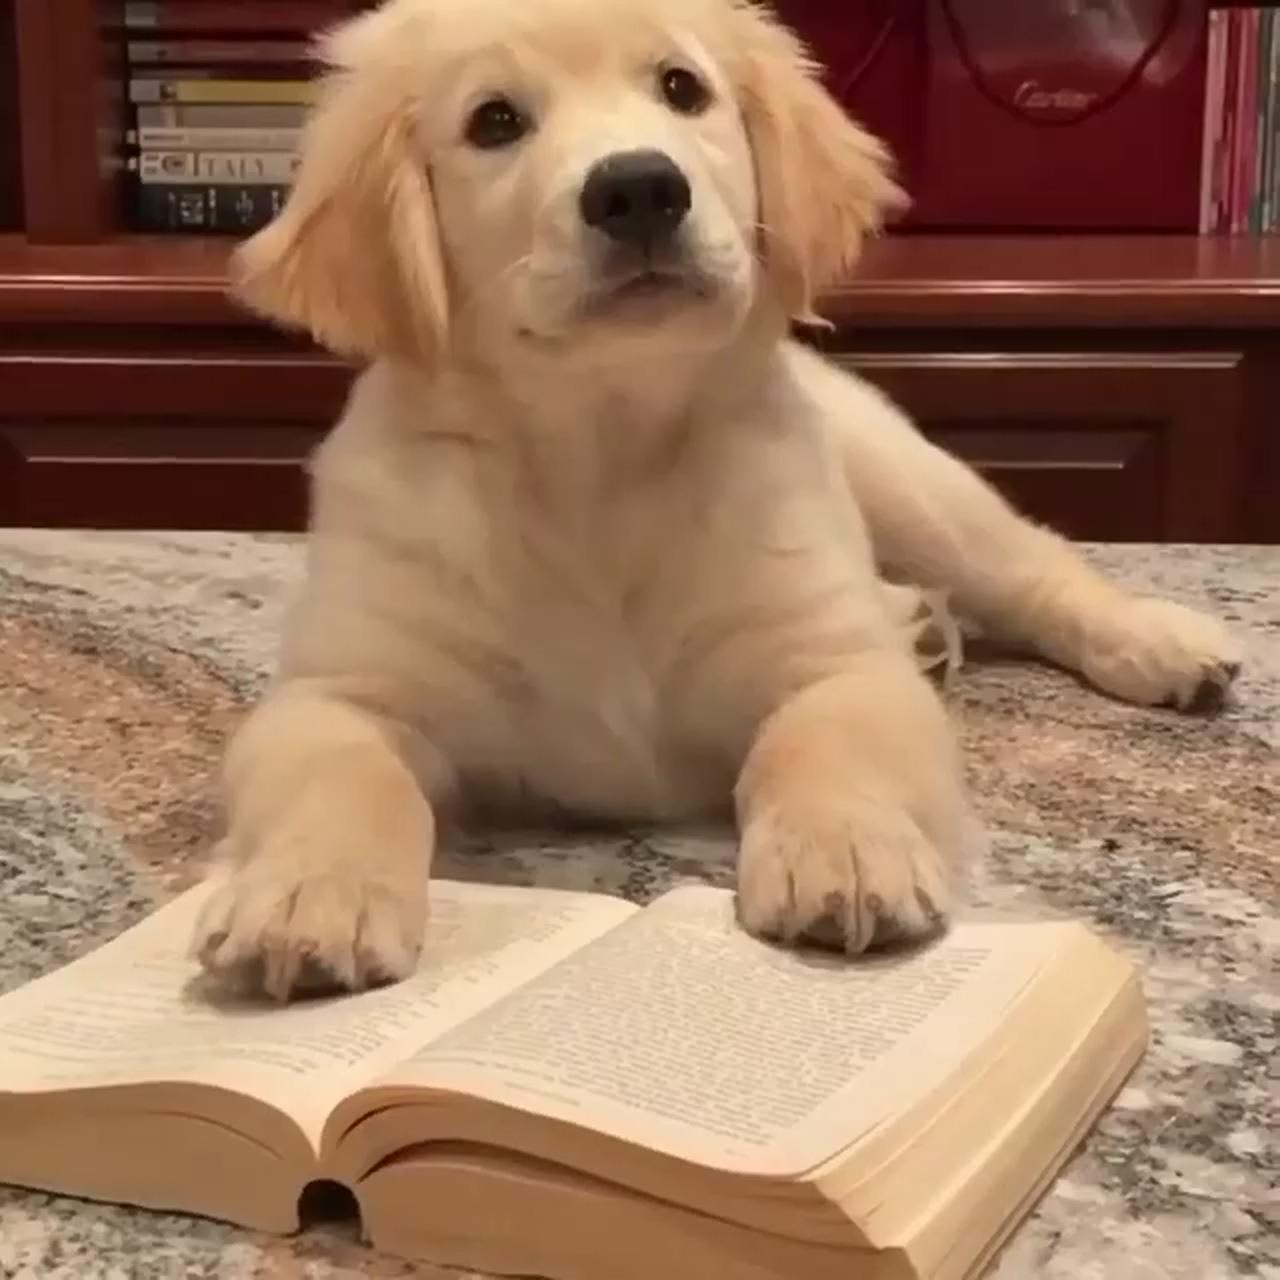 When a dog reading book; nope i want more